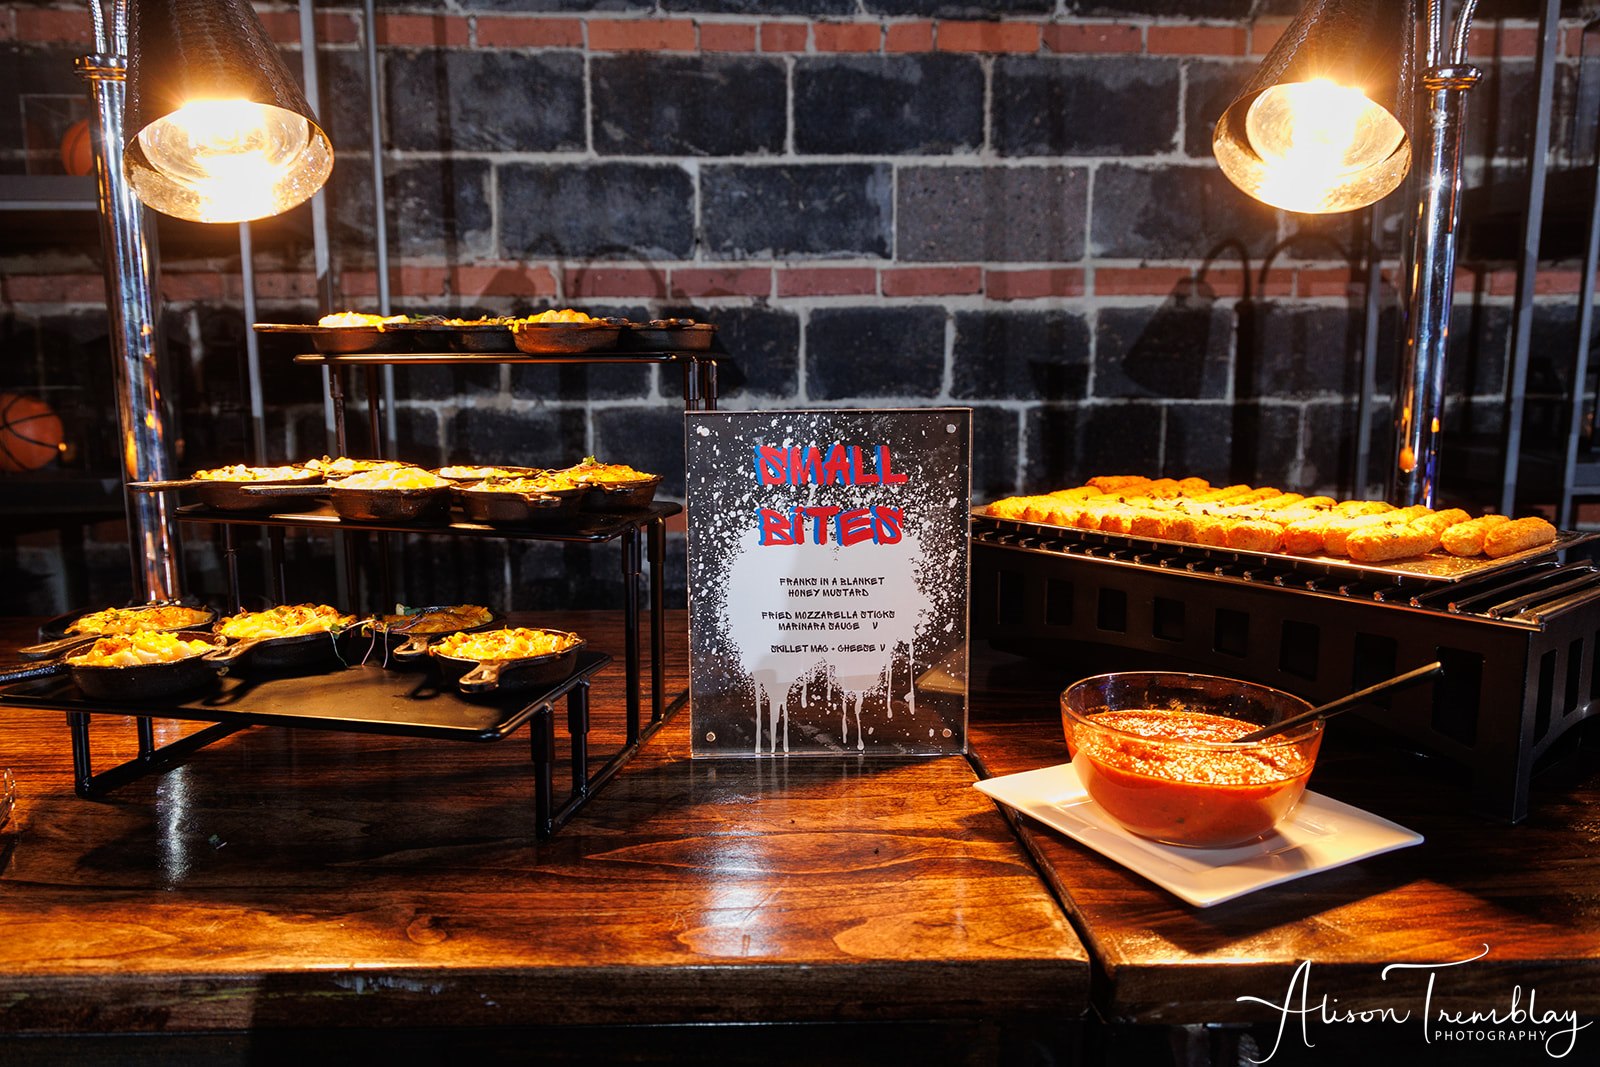 Get Plated provided a unique menu that both the adults and kids loved. at Sebastian's Graffiti and Sports Bar Mitzvah Party at Hook Hall in Washington, DC | Pop Color Events | Adding a Pop of Color to Bar & Bat Mitzvahs in DC, MD & VA | Photo by: Alison Tremblay